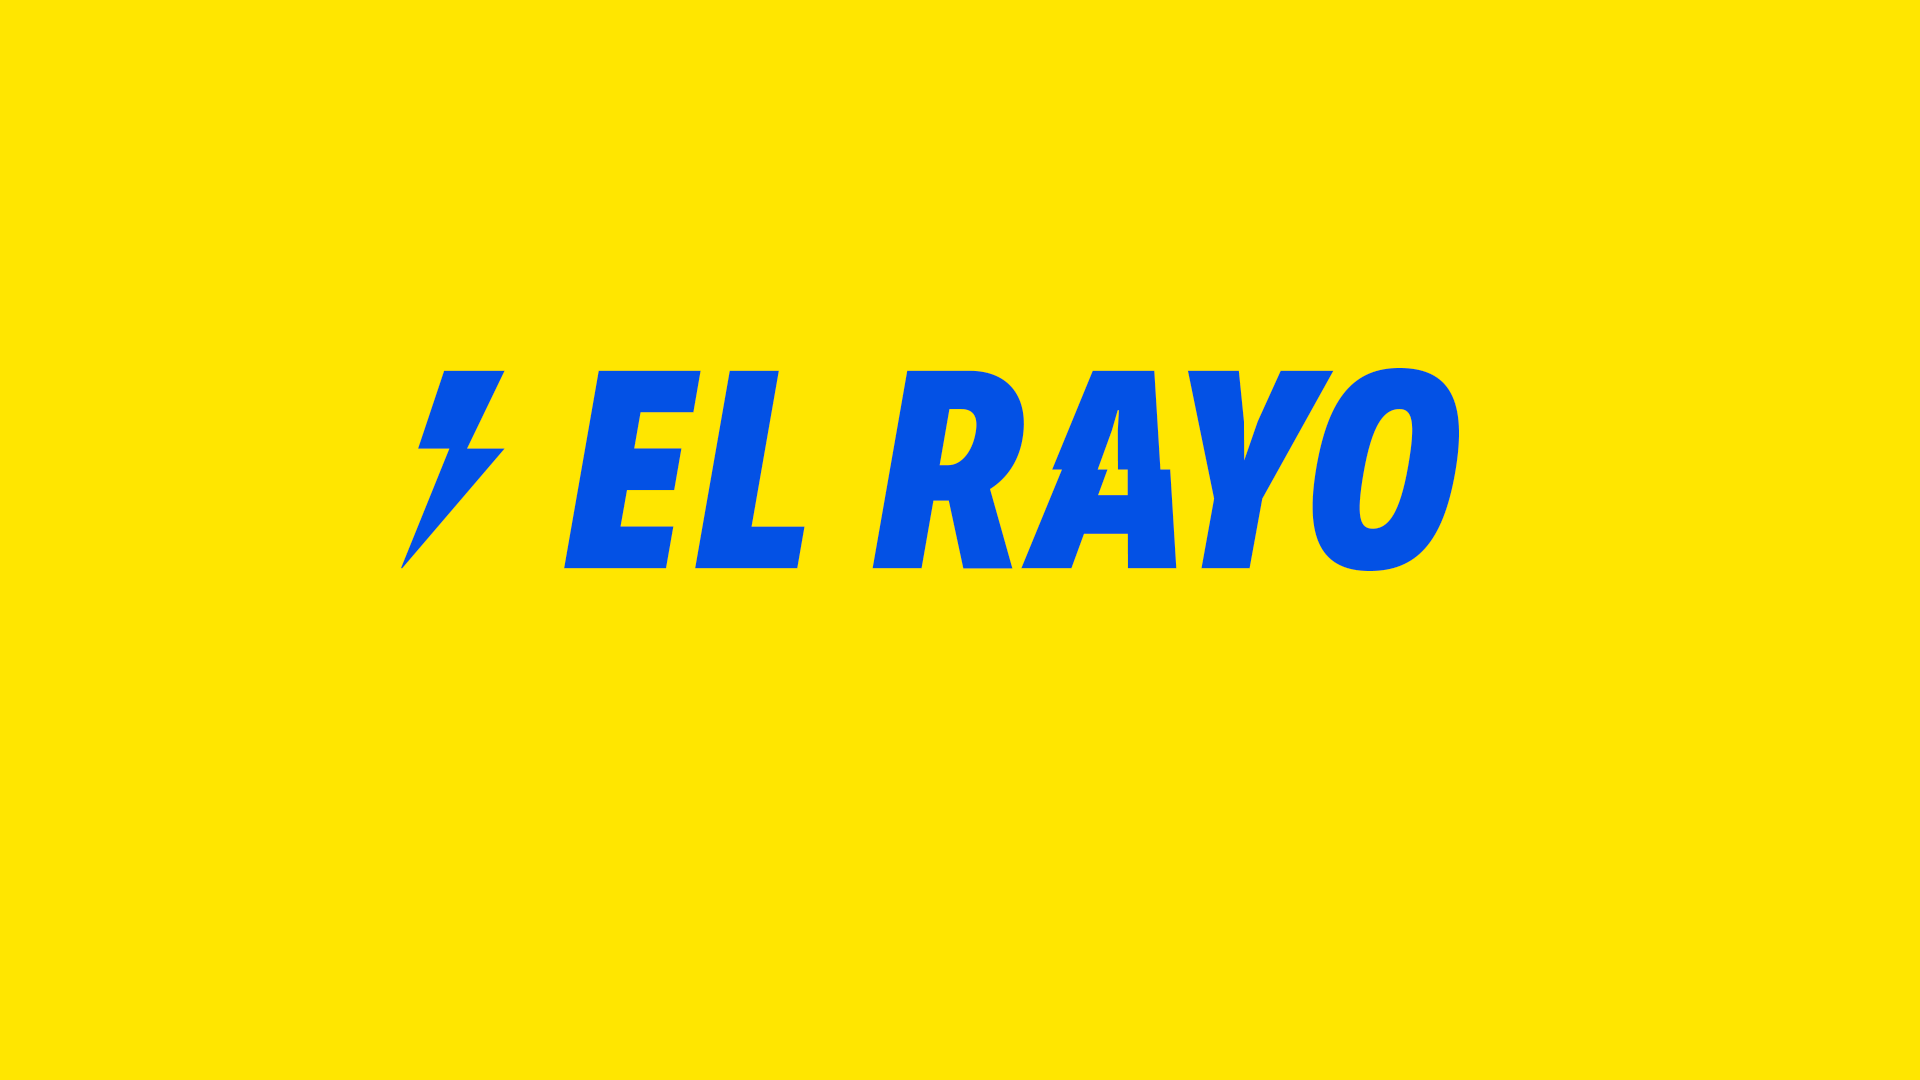 Brand identity for El Rayo, a chain of department stores from Costa Rica by FUERA